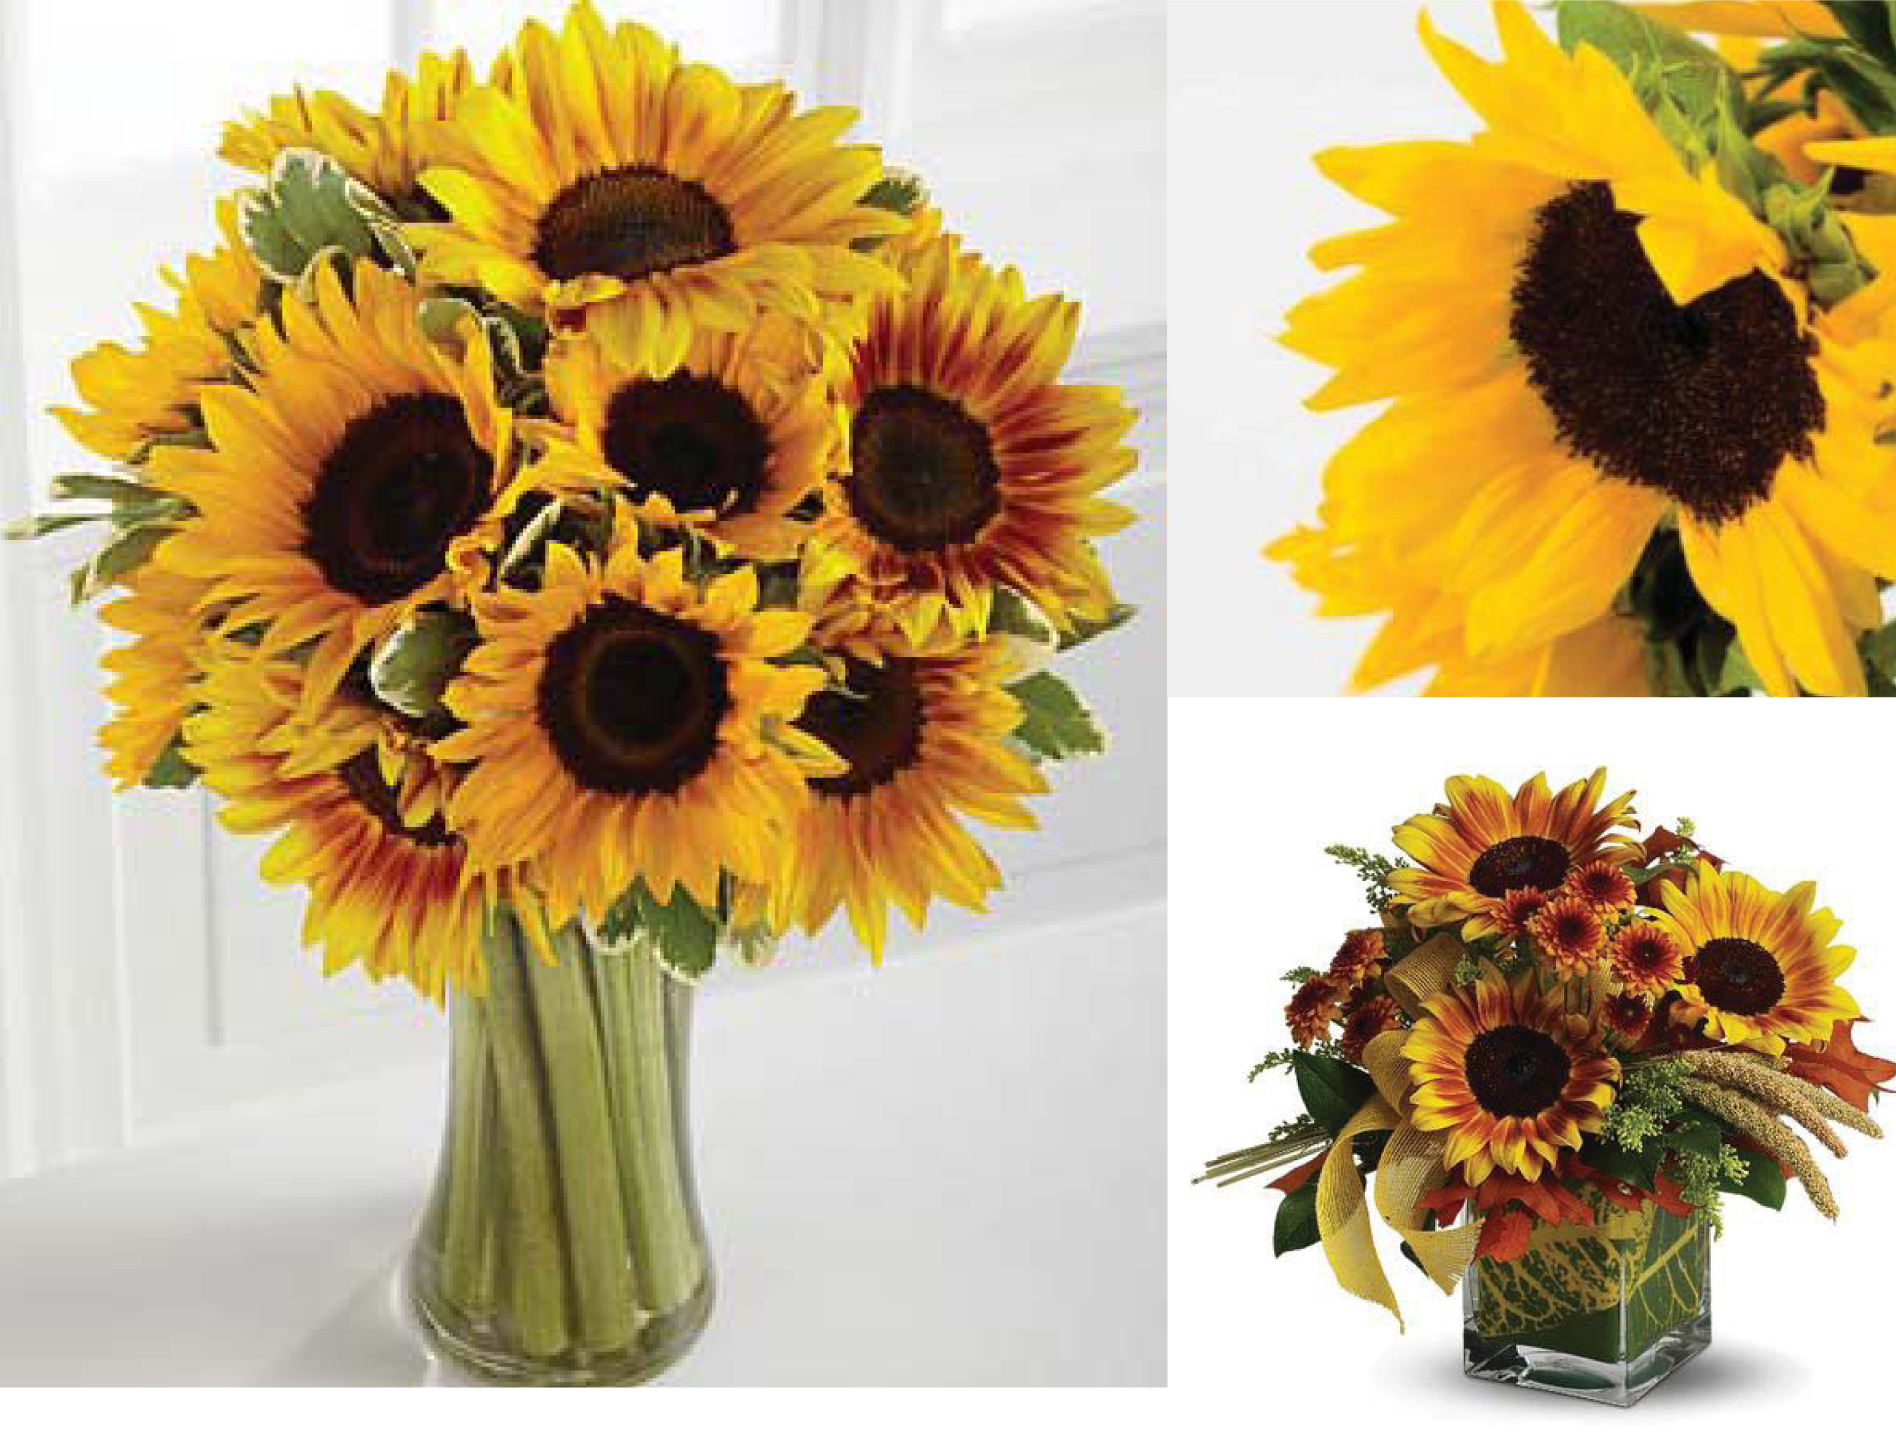 Tis the Season for Sunflowers | Carithers Flowers